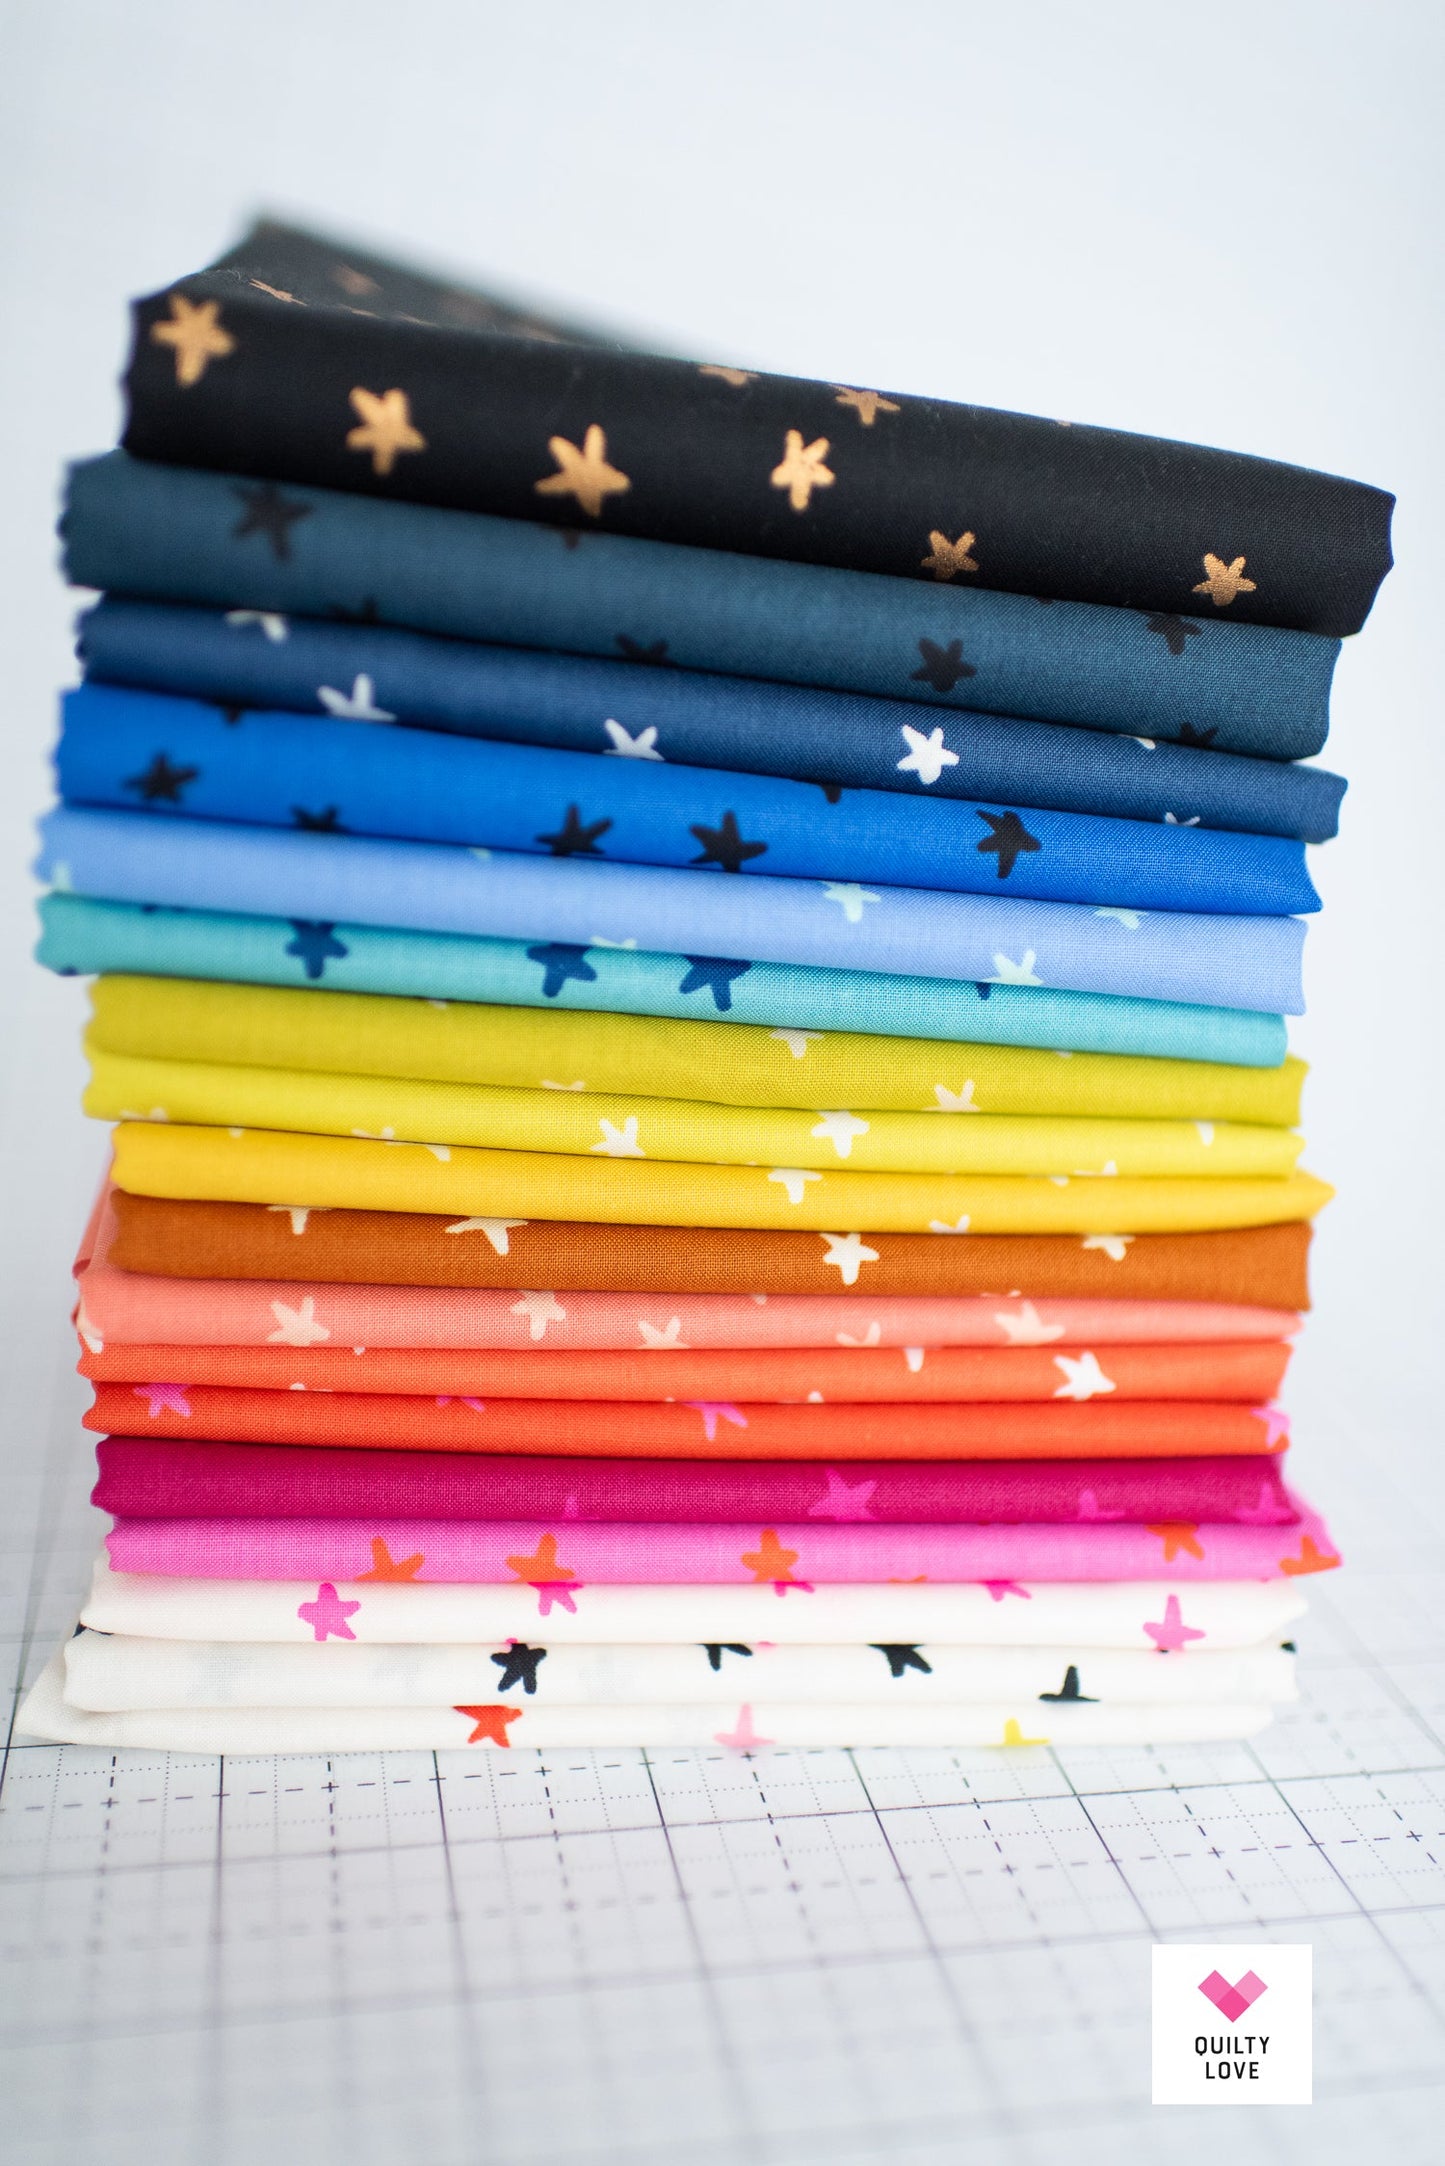 New Starry Fat Quarter Bundle by Ruby Star Society